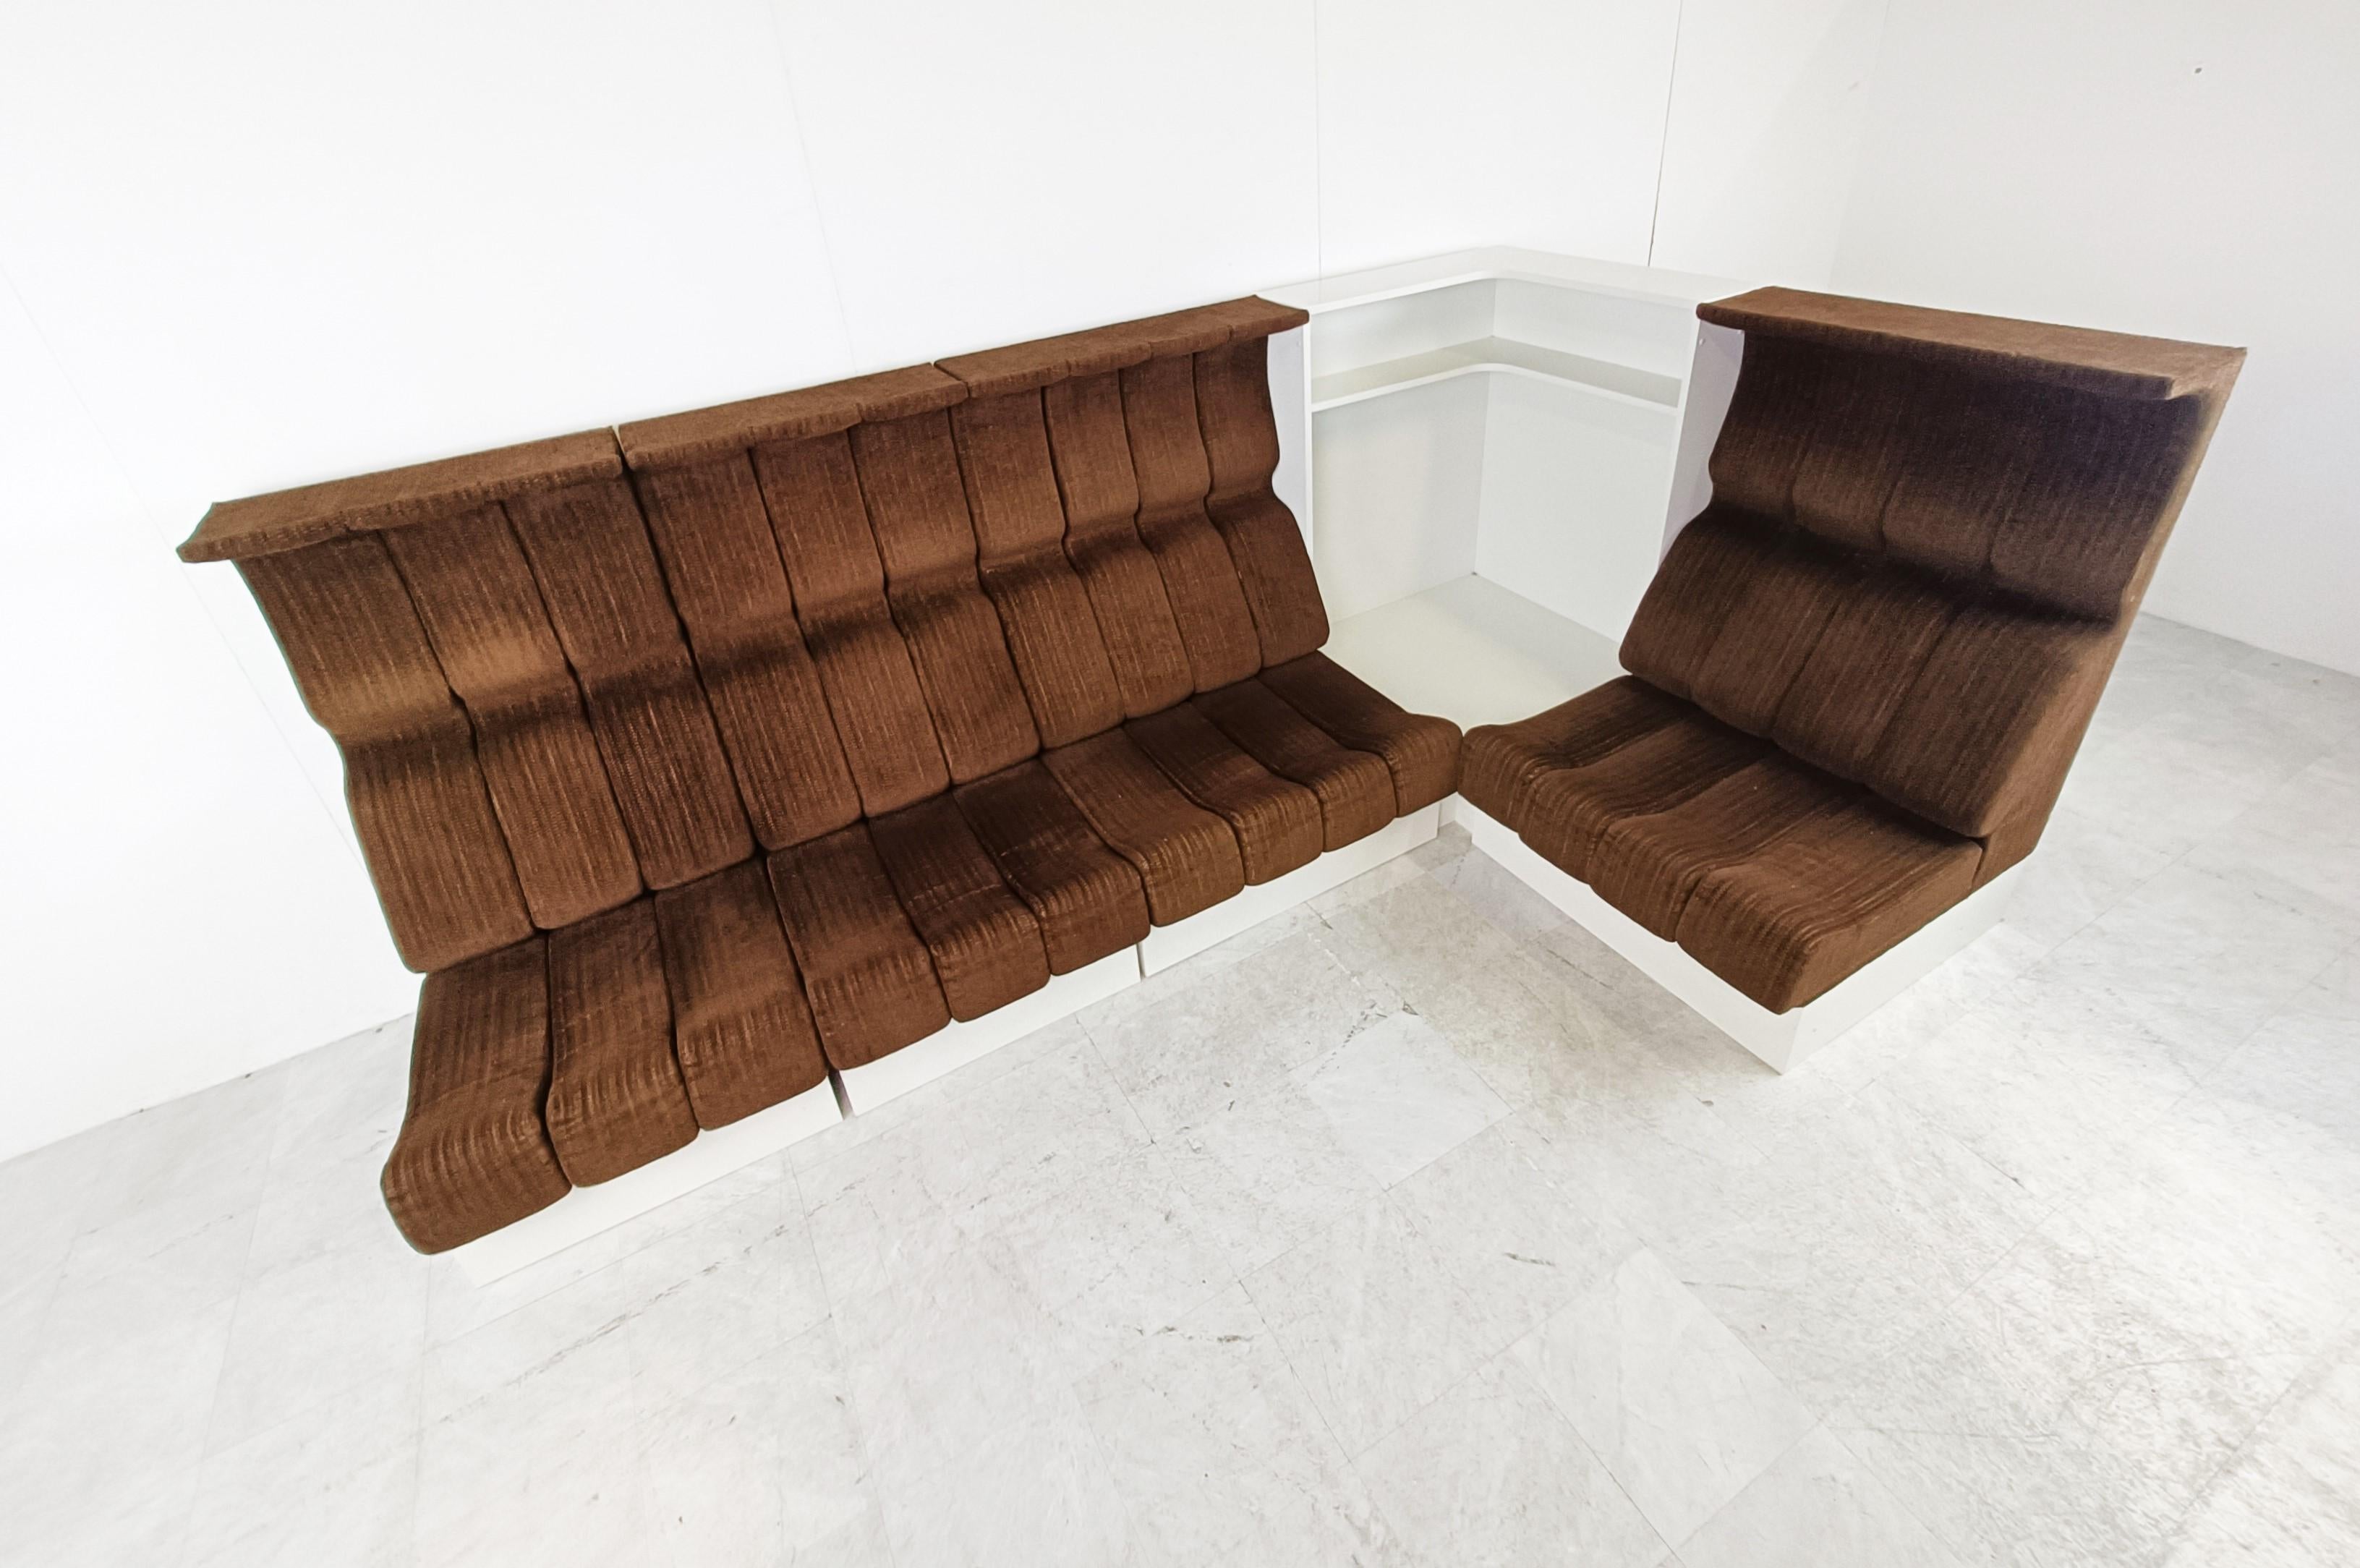 Late 20th Century Space Age Sofa by Interlübke, 1970s For Sale